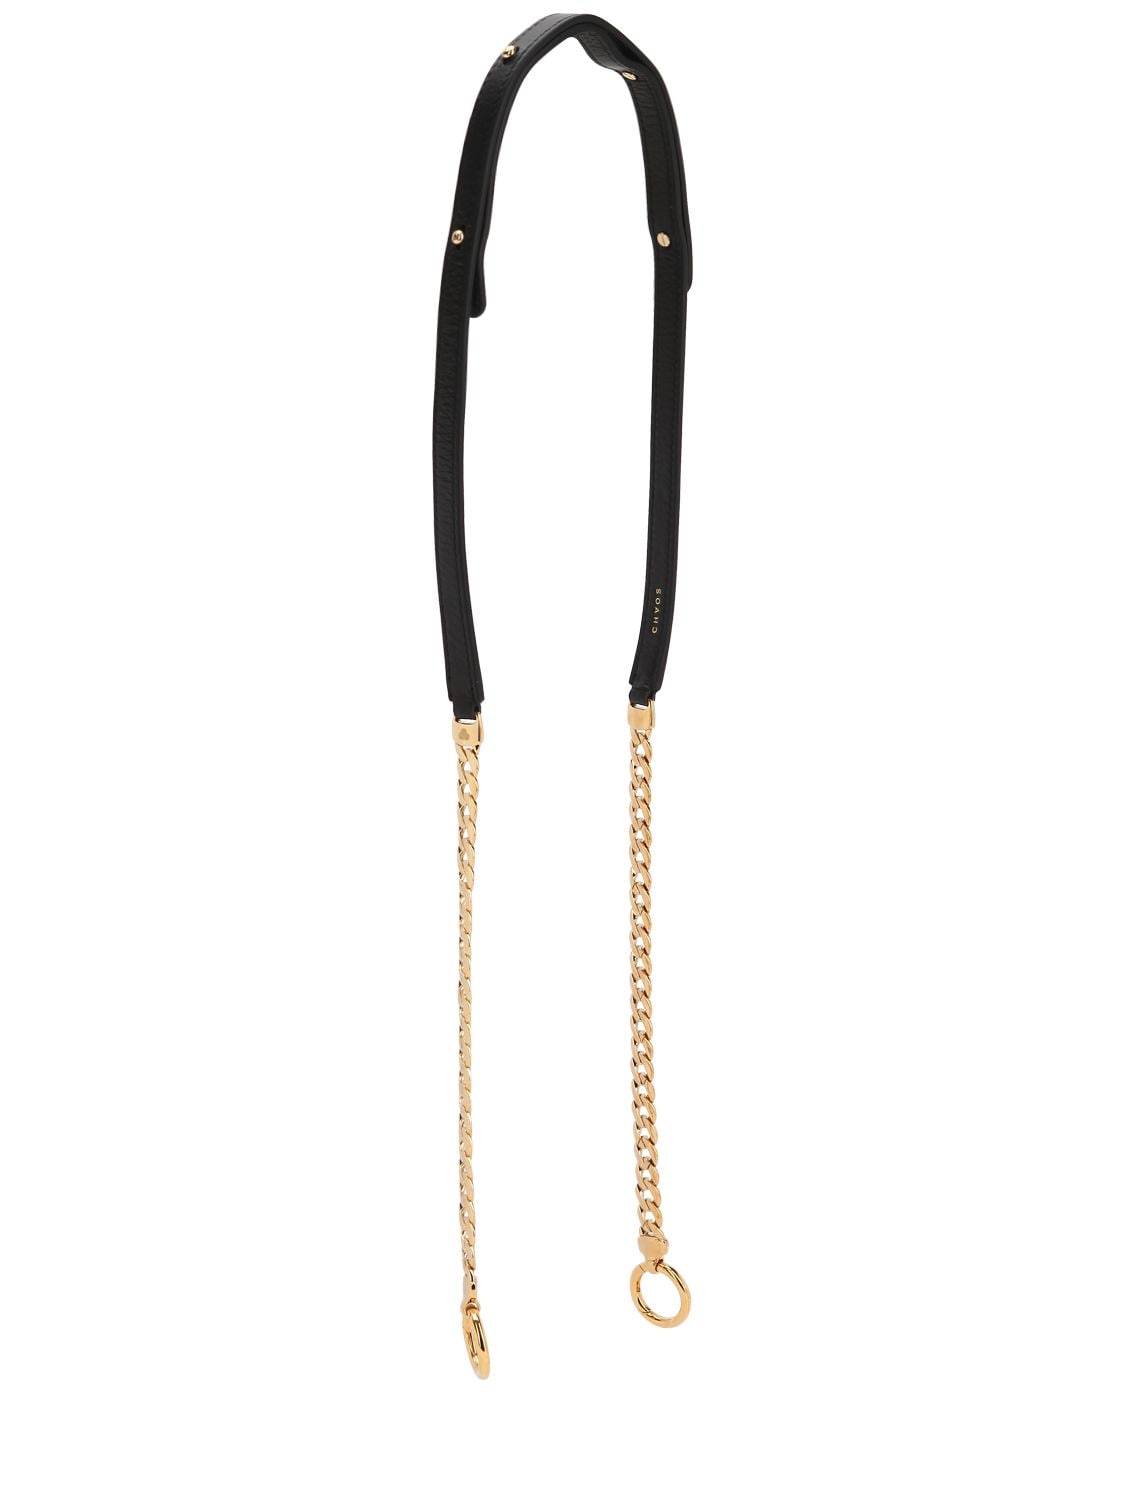 Chaos Leather & Metal Chain Bag Strap In Gold/black